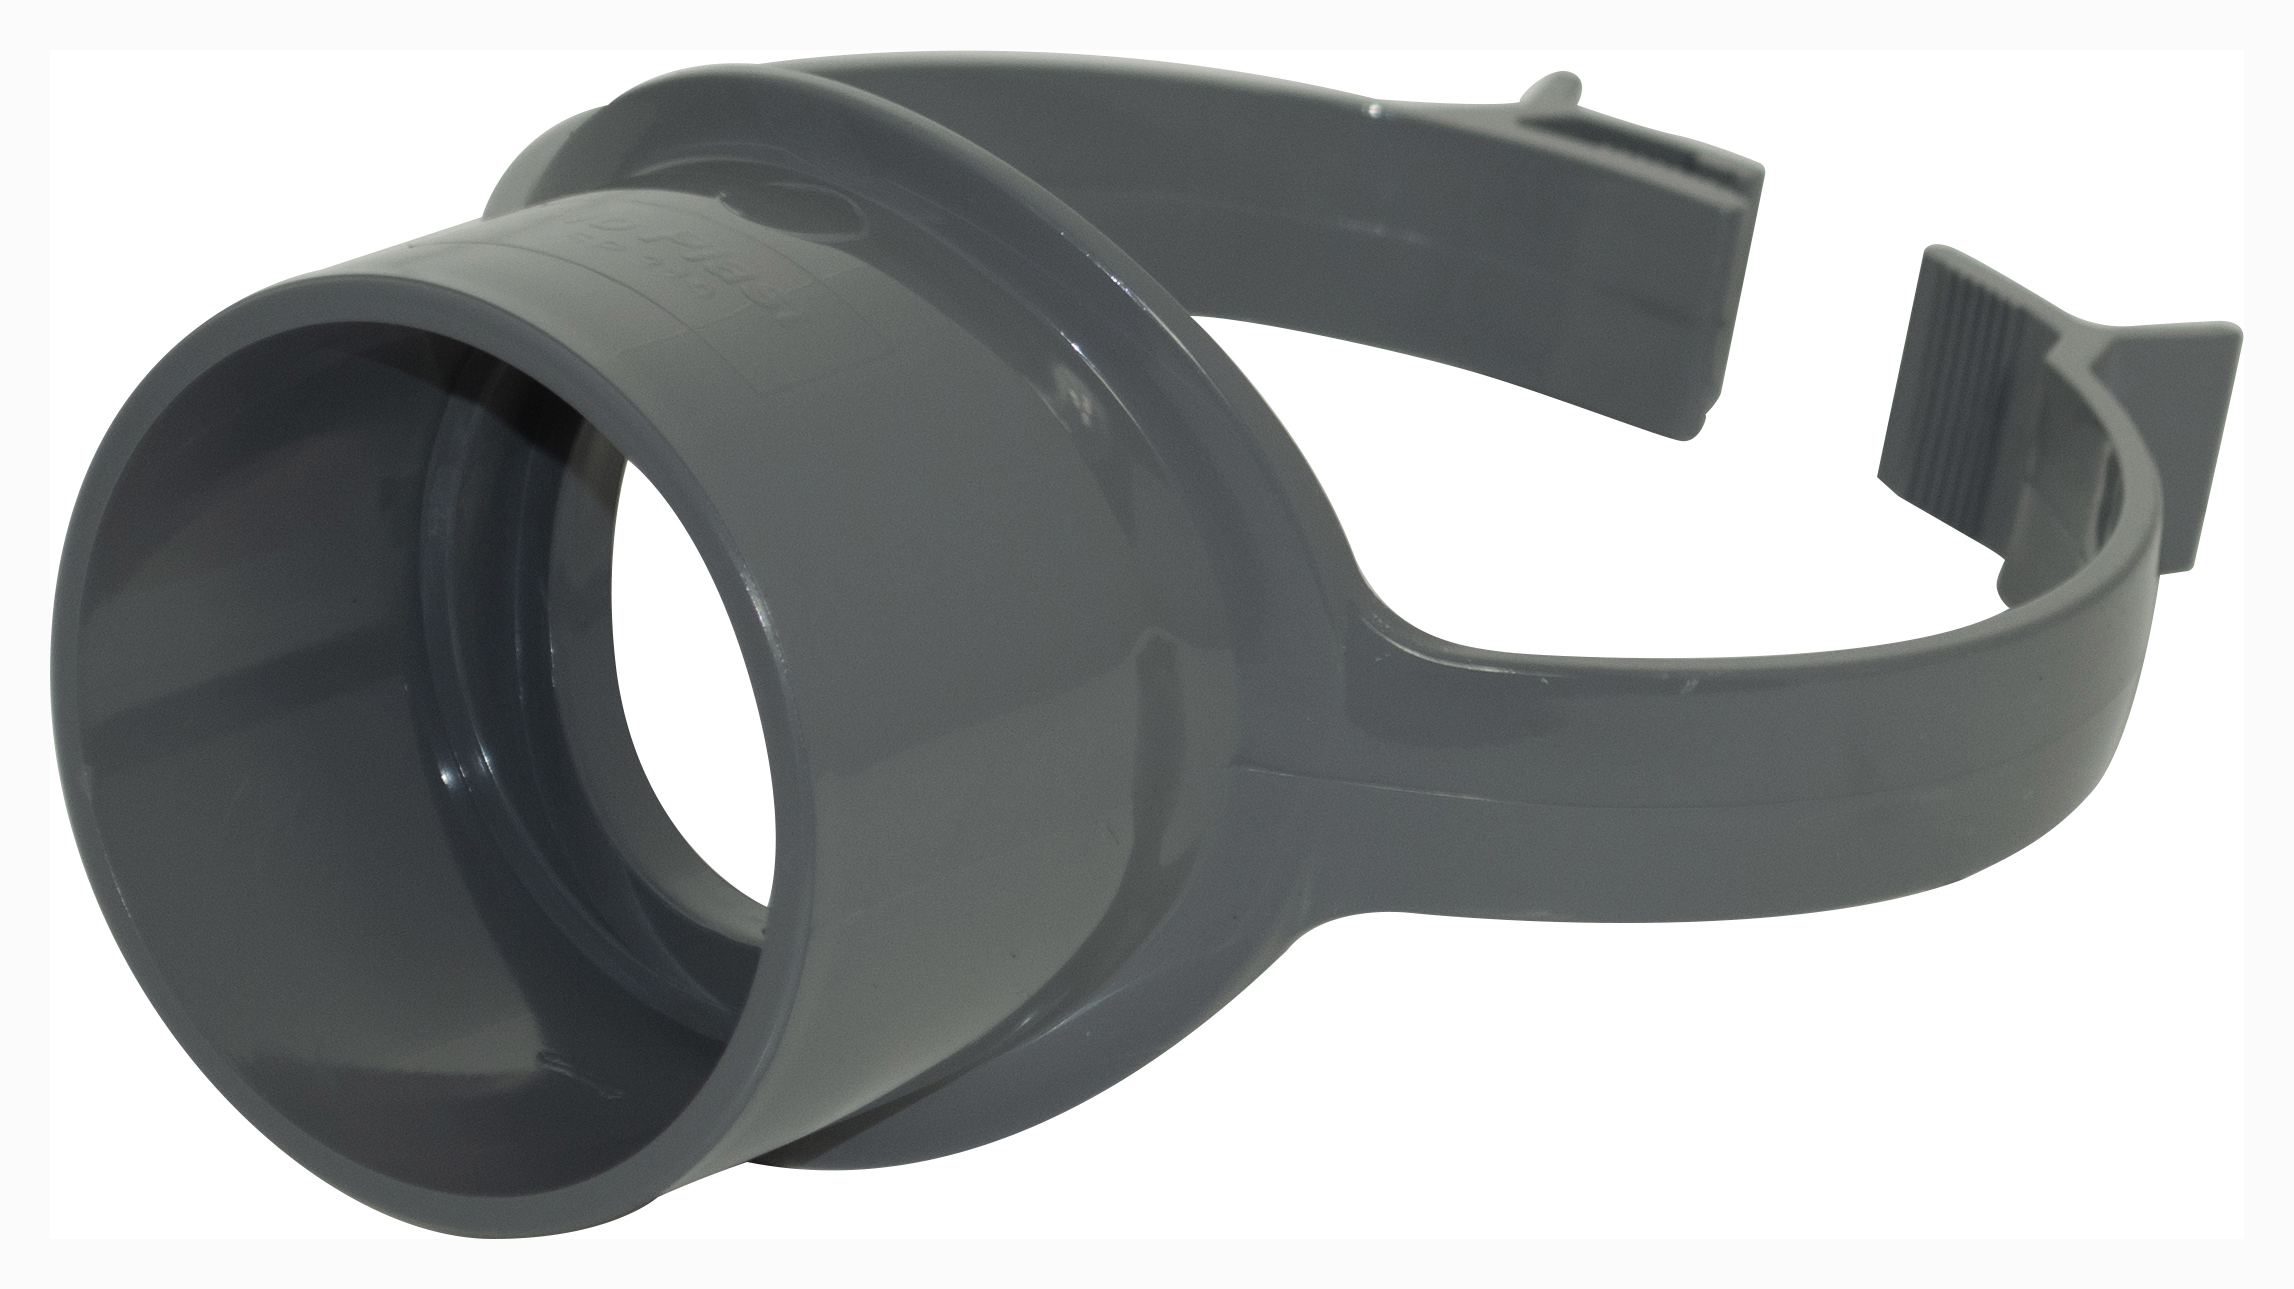 Image of Floplast 110mm Soil Pipe Strap On Pipe Connector - Anthracite Grey SP319AG